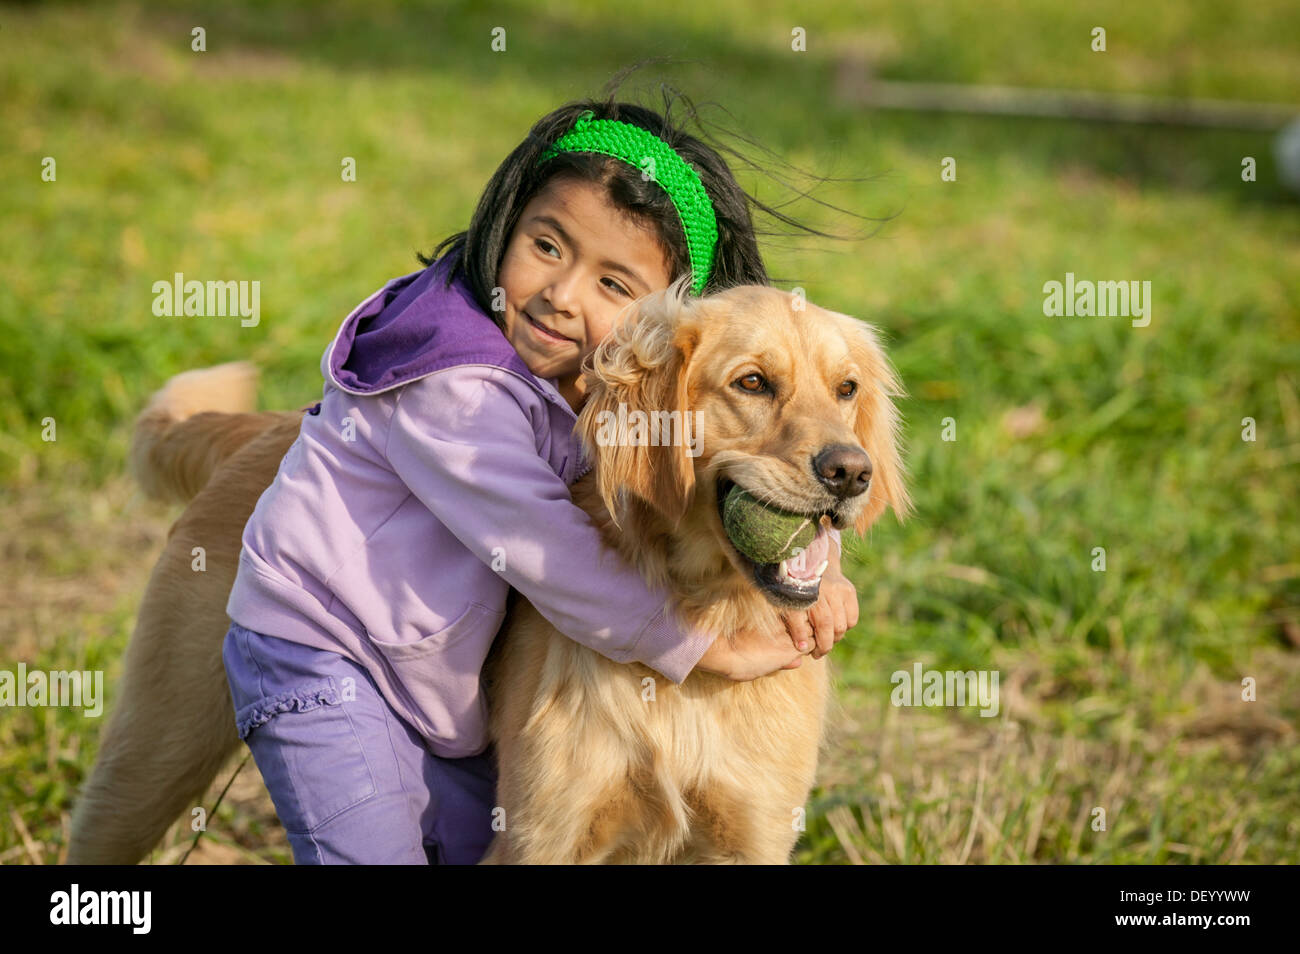 Girl, Latina, playing with family dog, golden retriever, upstate New York, Mohawk Valley Stock Photo